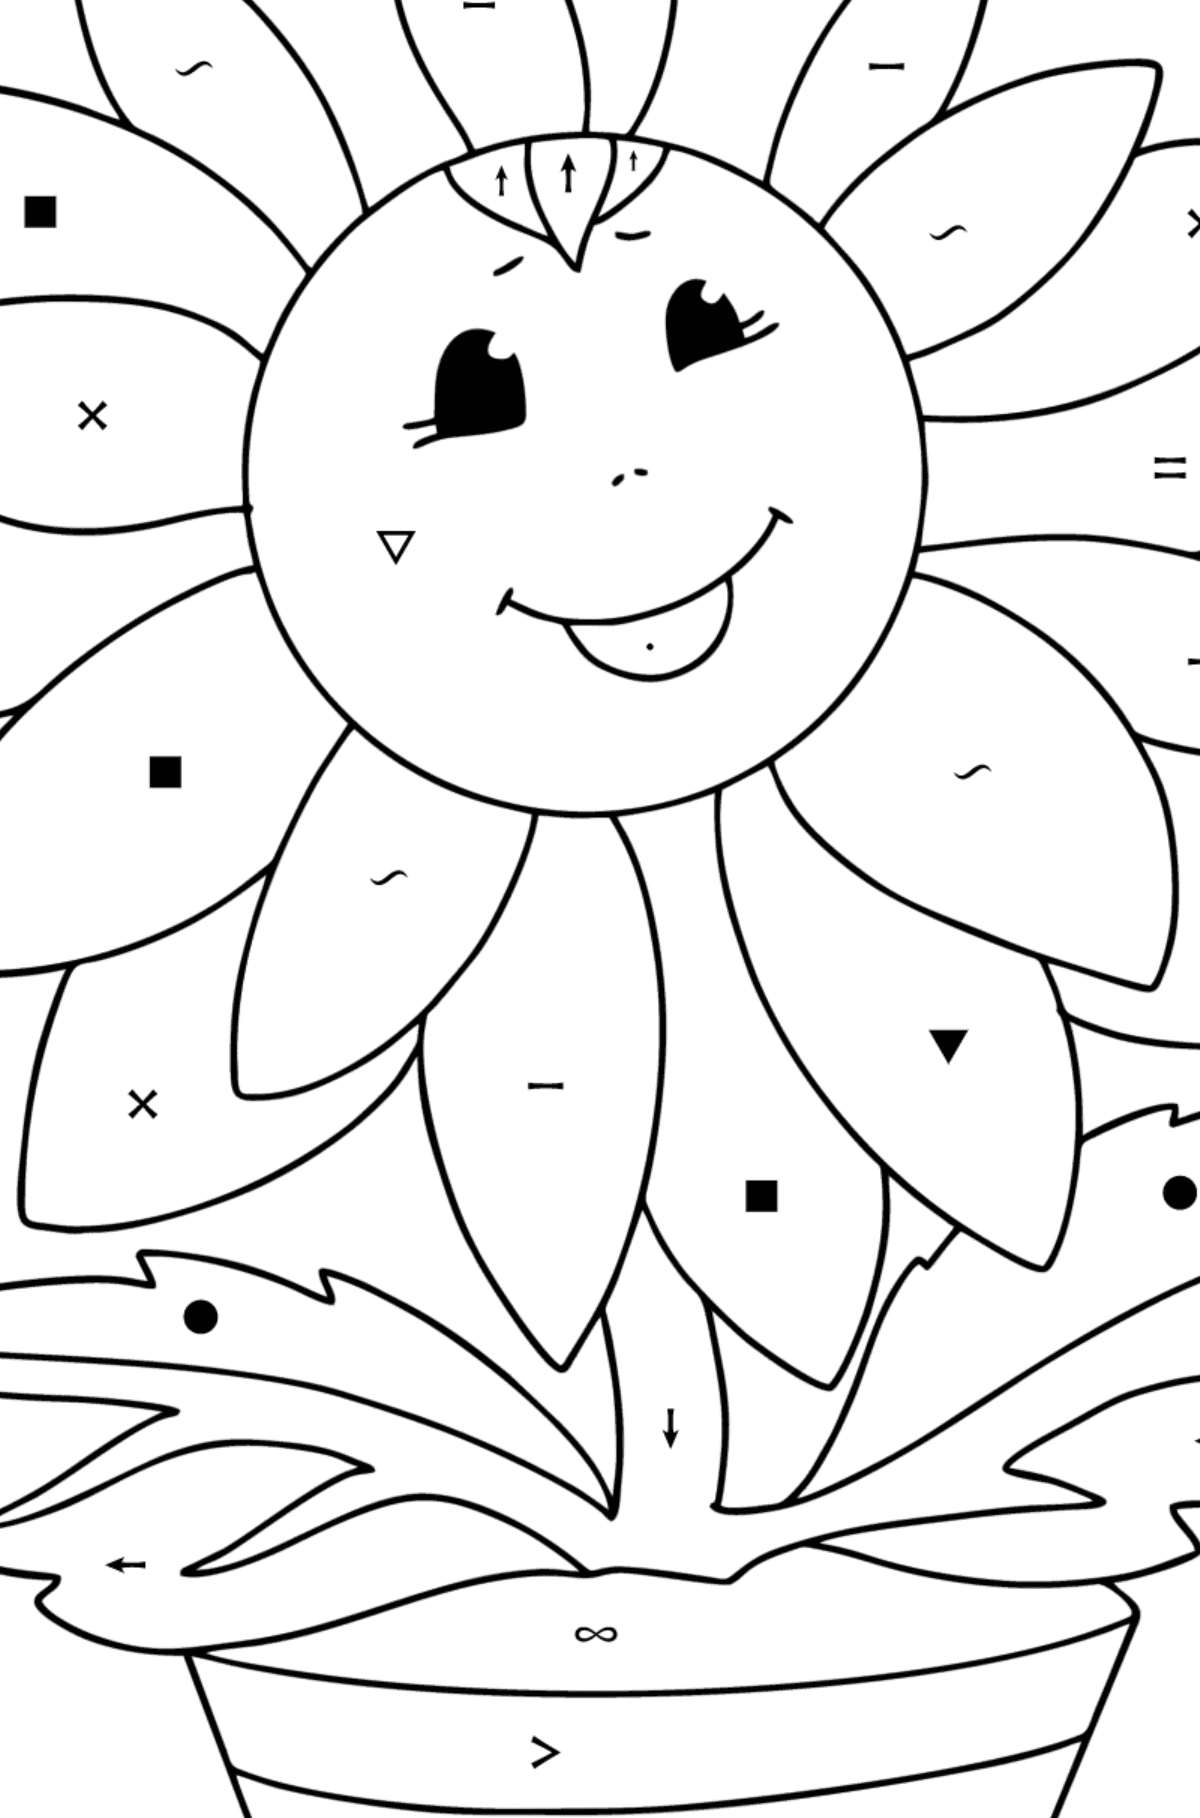 Sunflower with eyes coloring page - Coloring by Symbols for Kids